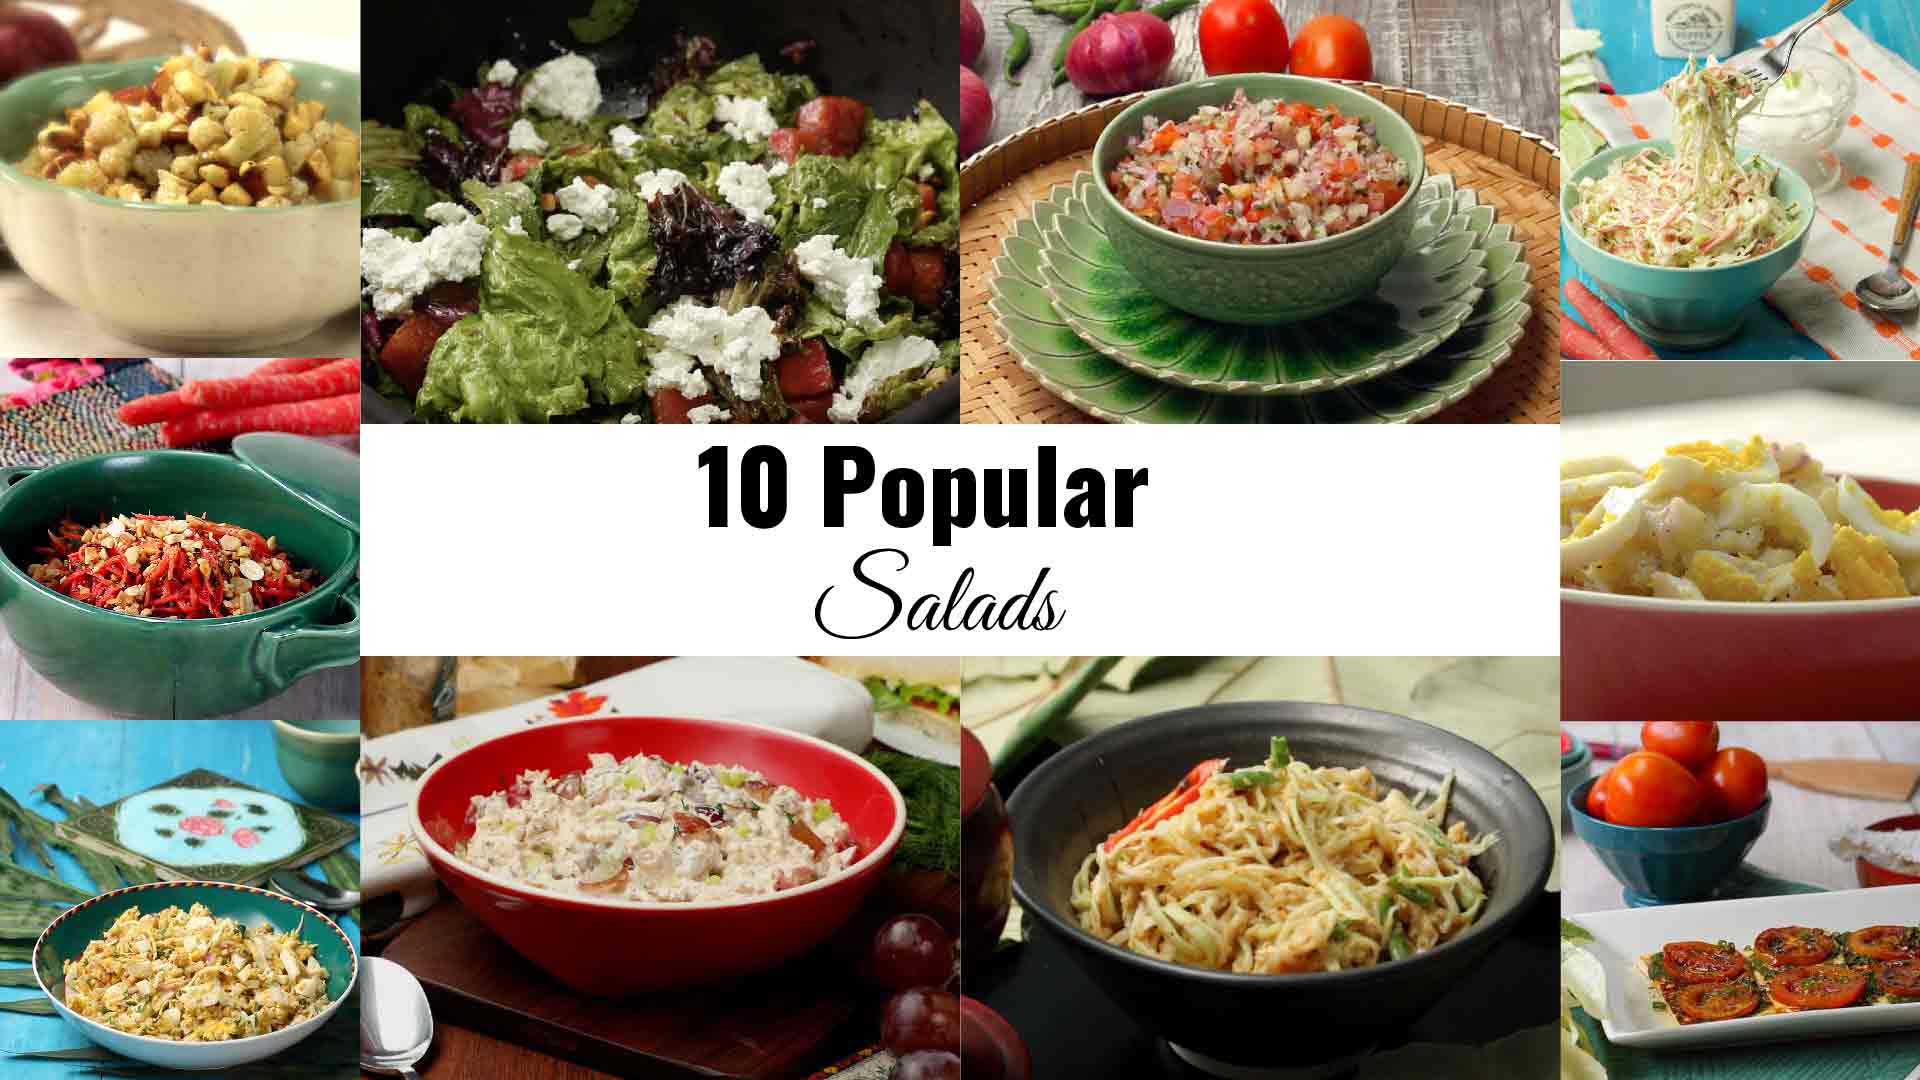 Salad Recipes: Munch Your Way Through Summer With 10 Easy & Popular Salads